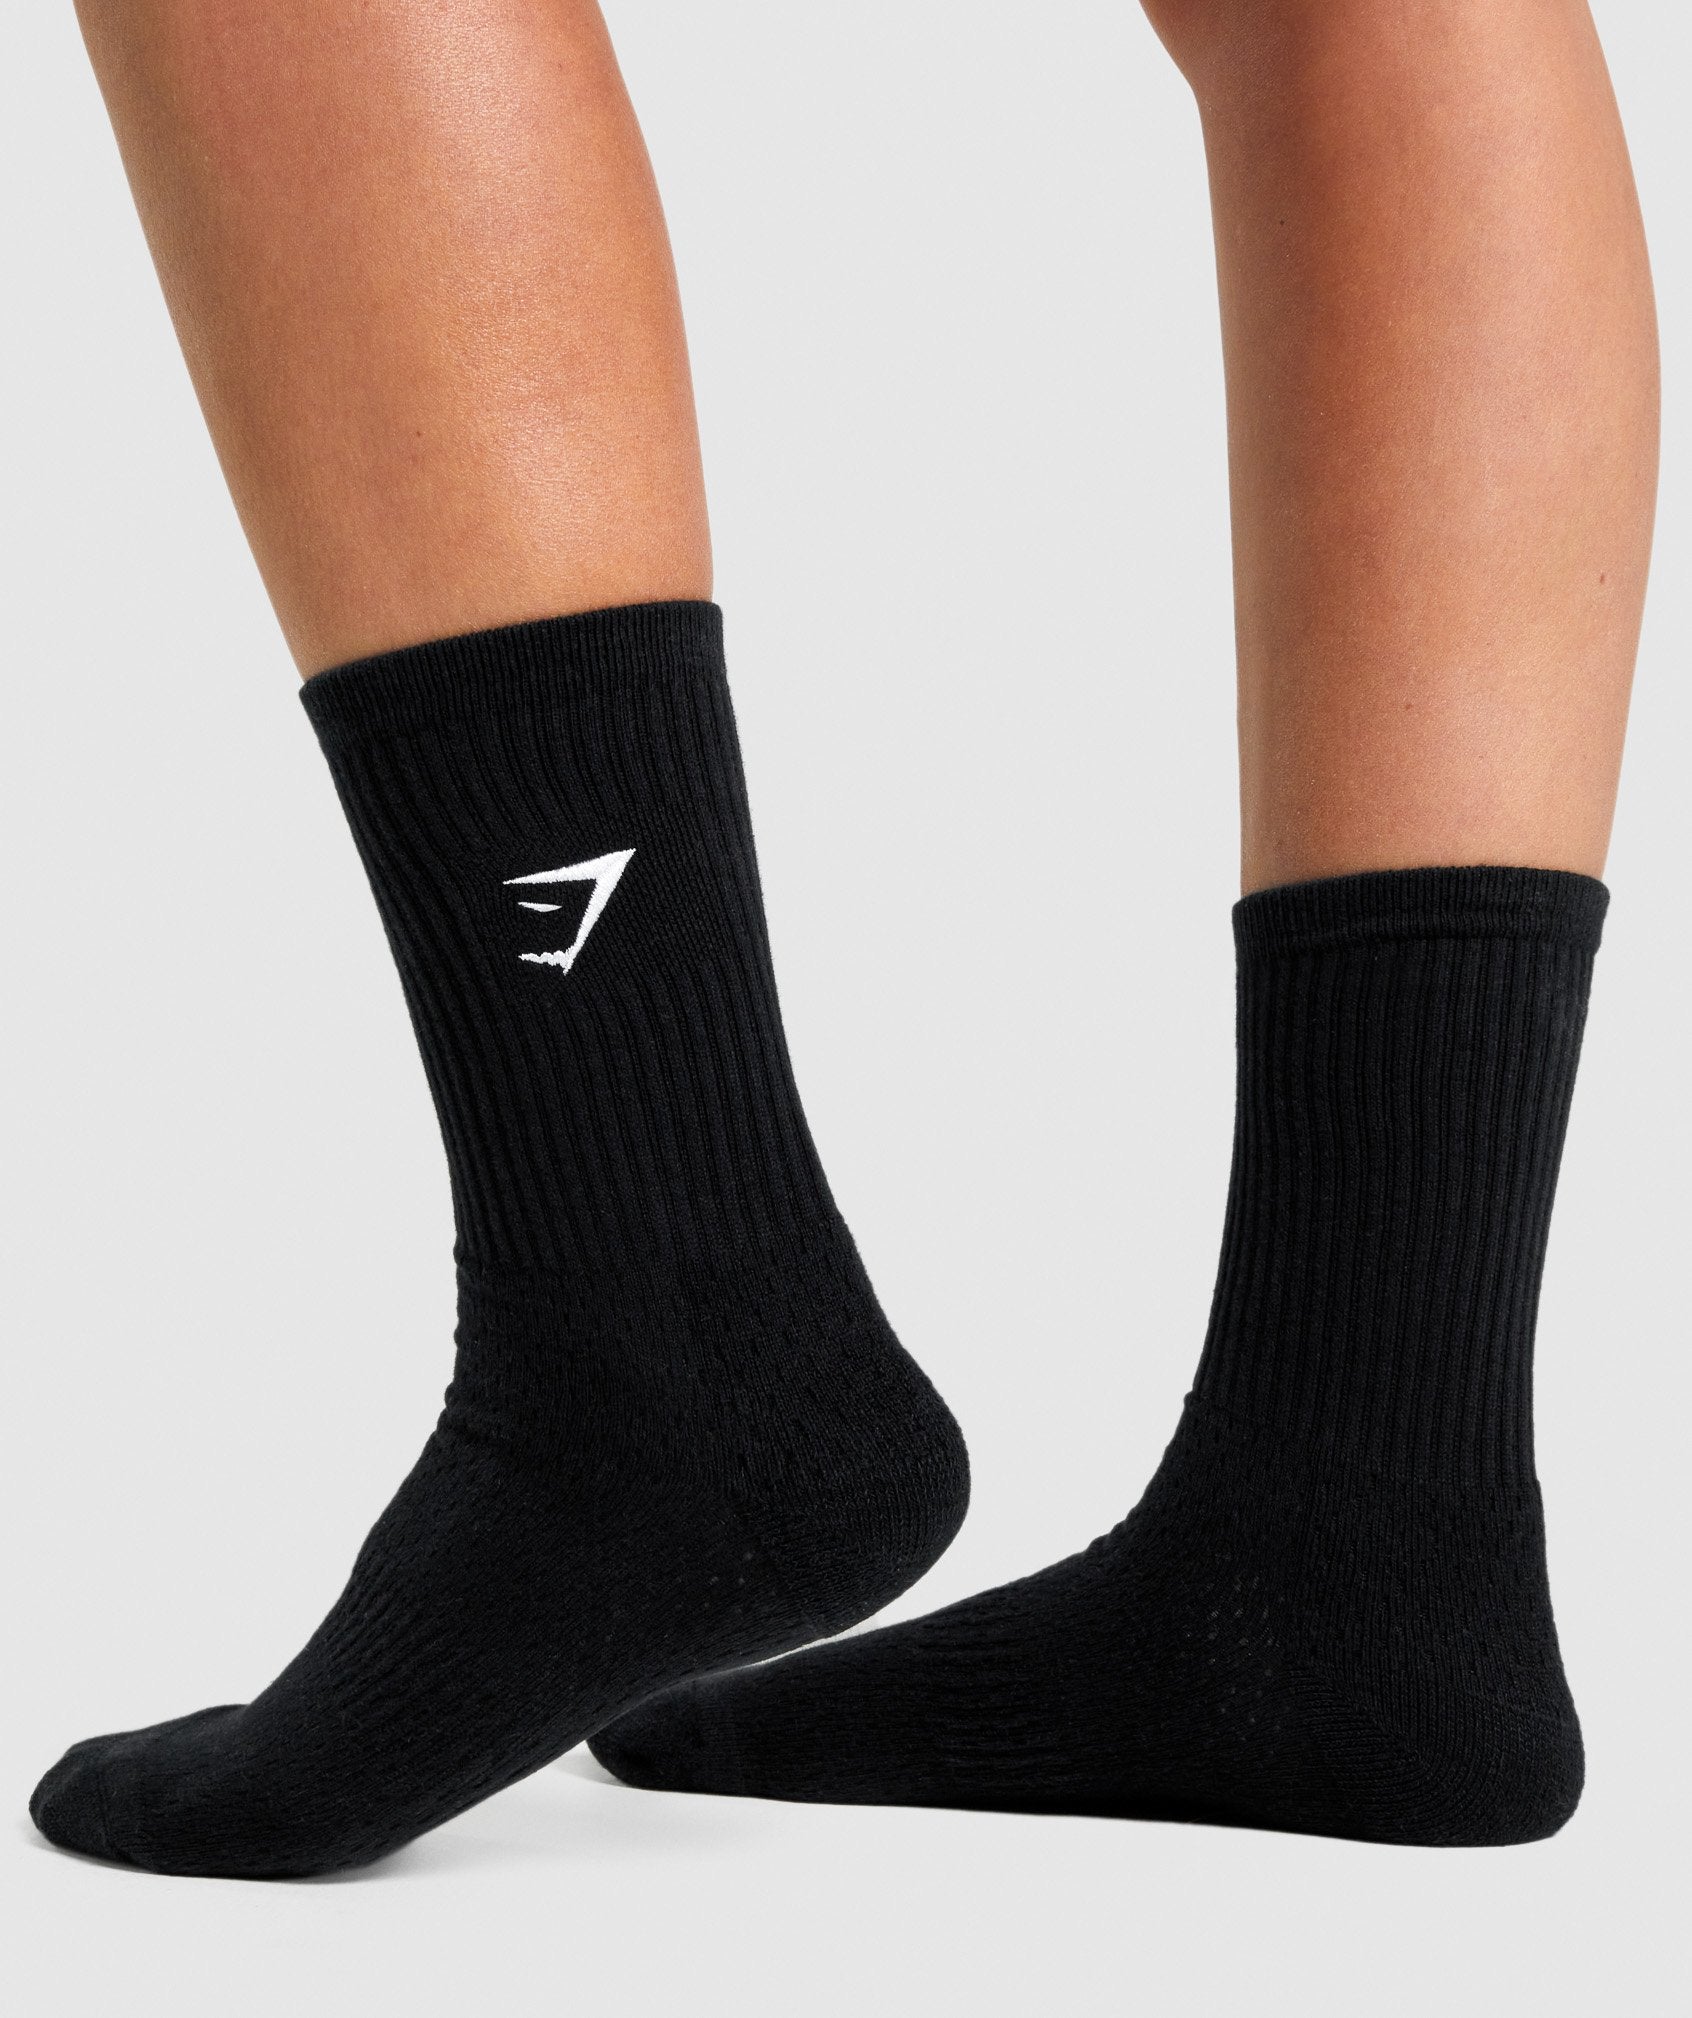 Gymshark Embroidered Sharkhead Crew Socks - Black – Client 446 100K products